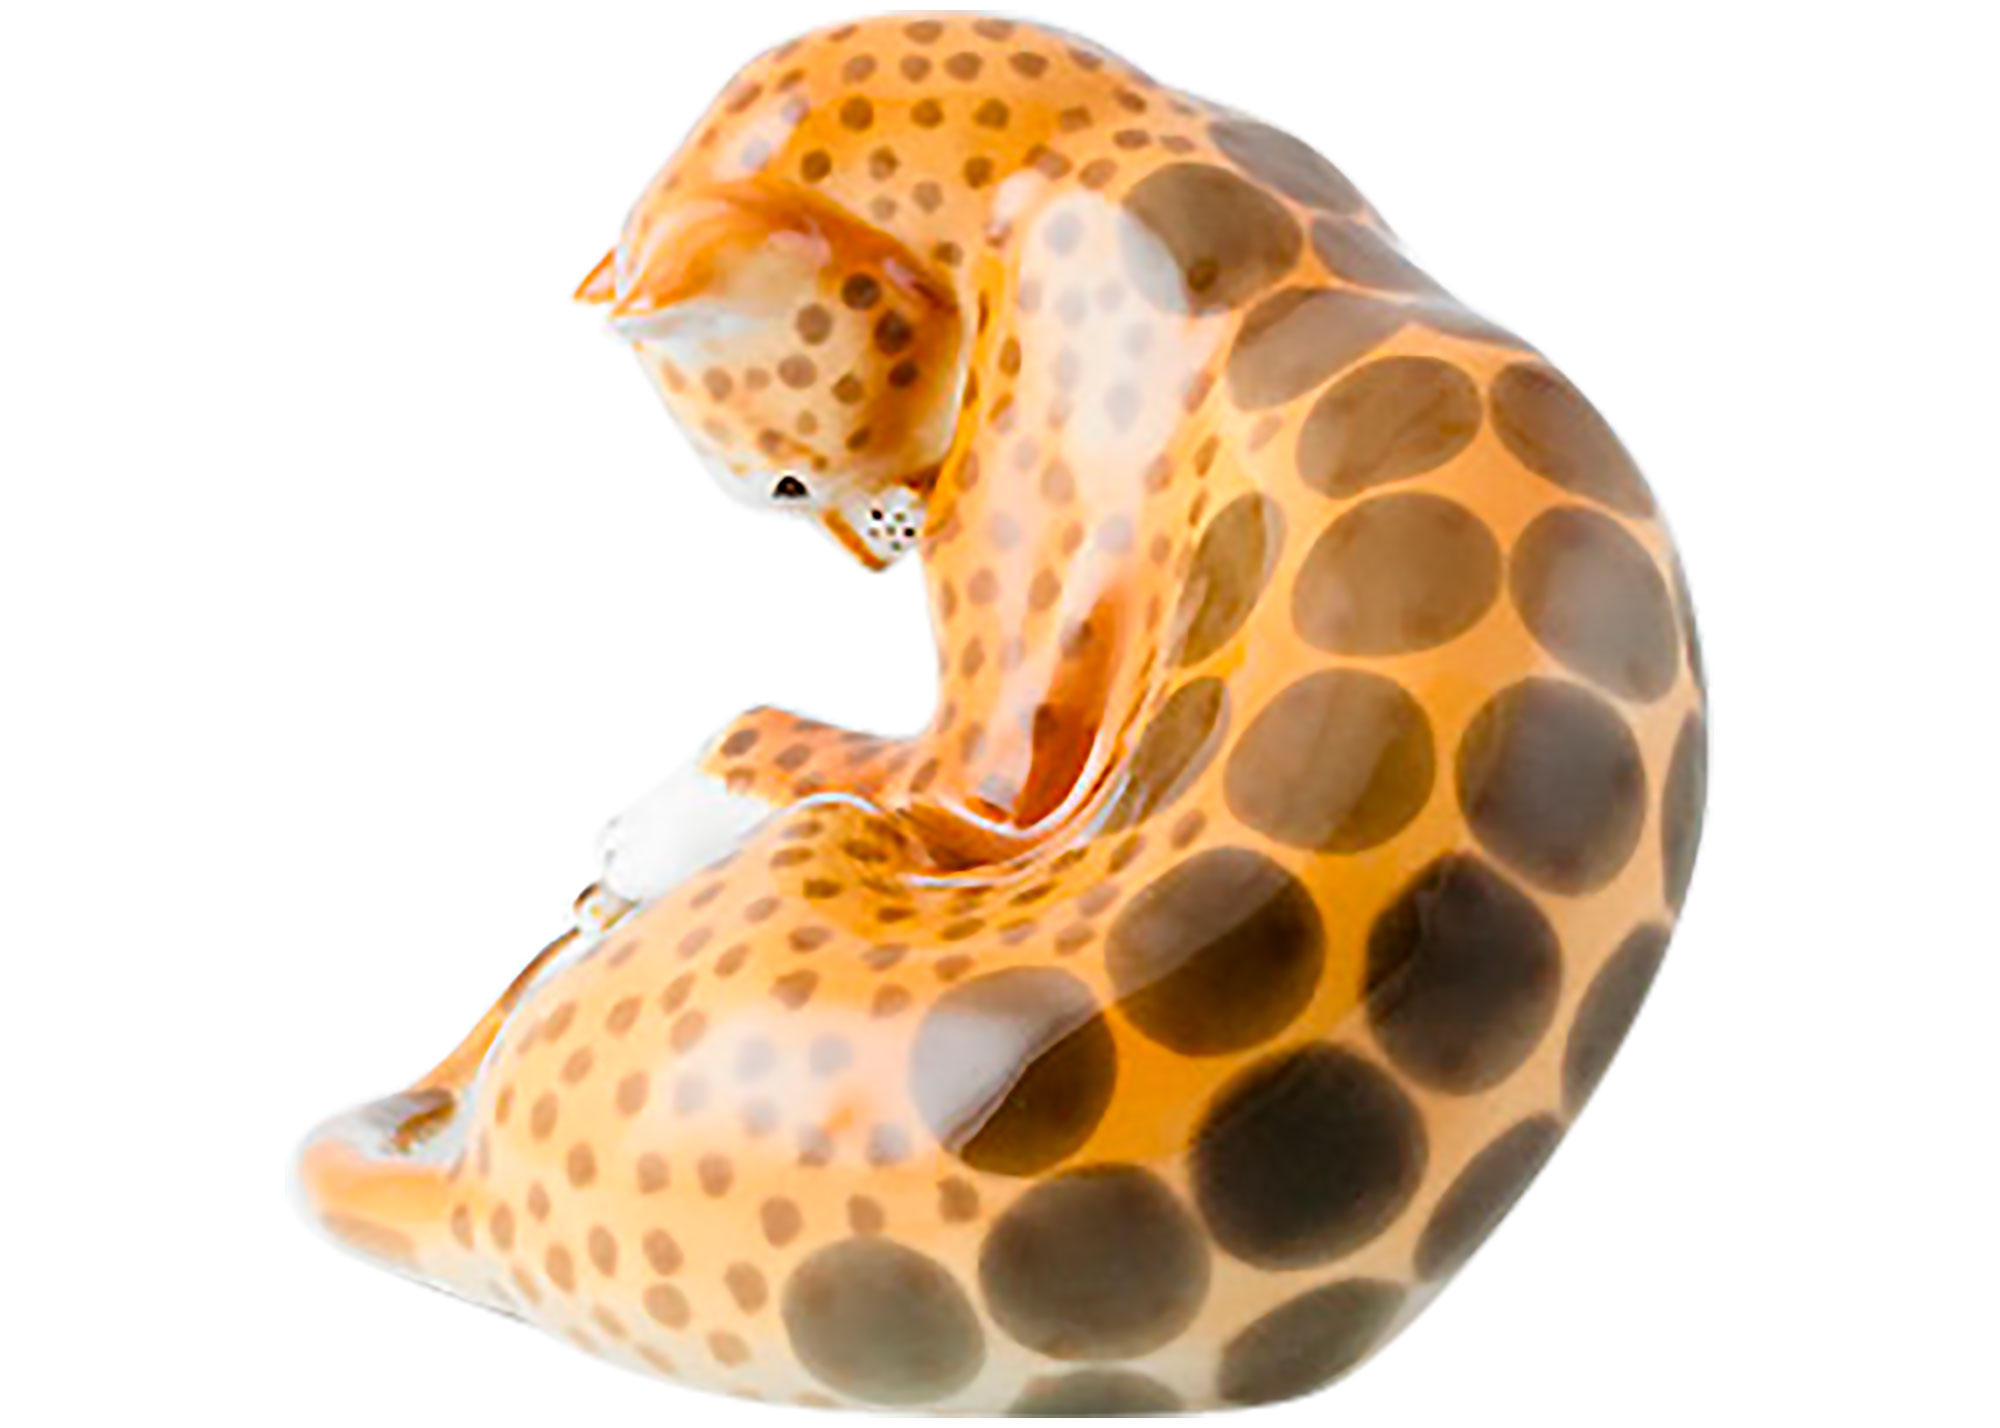 If you like Leopard clothes or Leopard sheets, you'll love this Lomonosov  porcelain Leopard figurine caught in action.